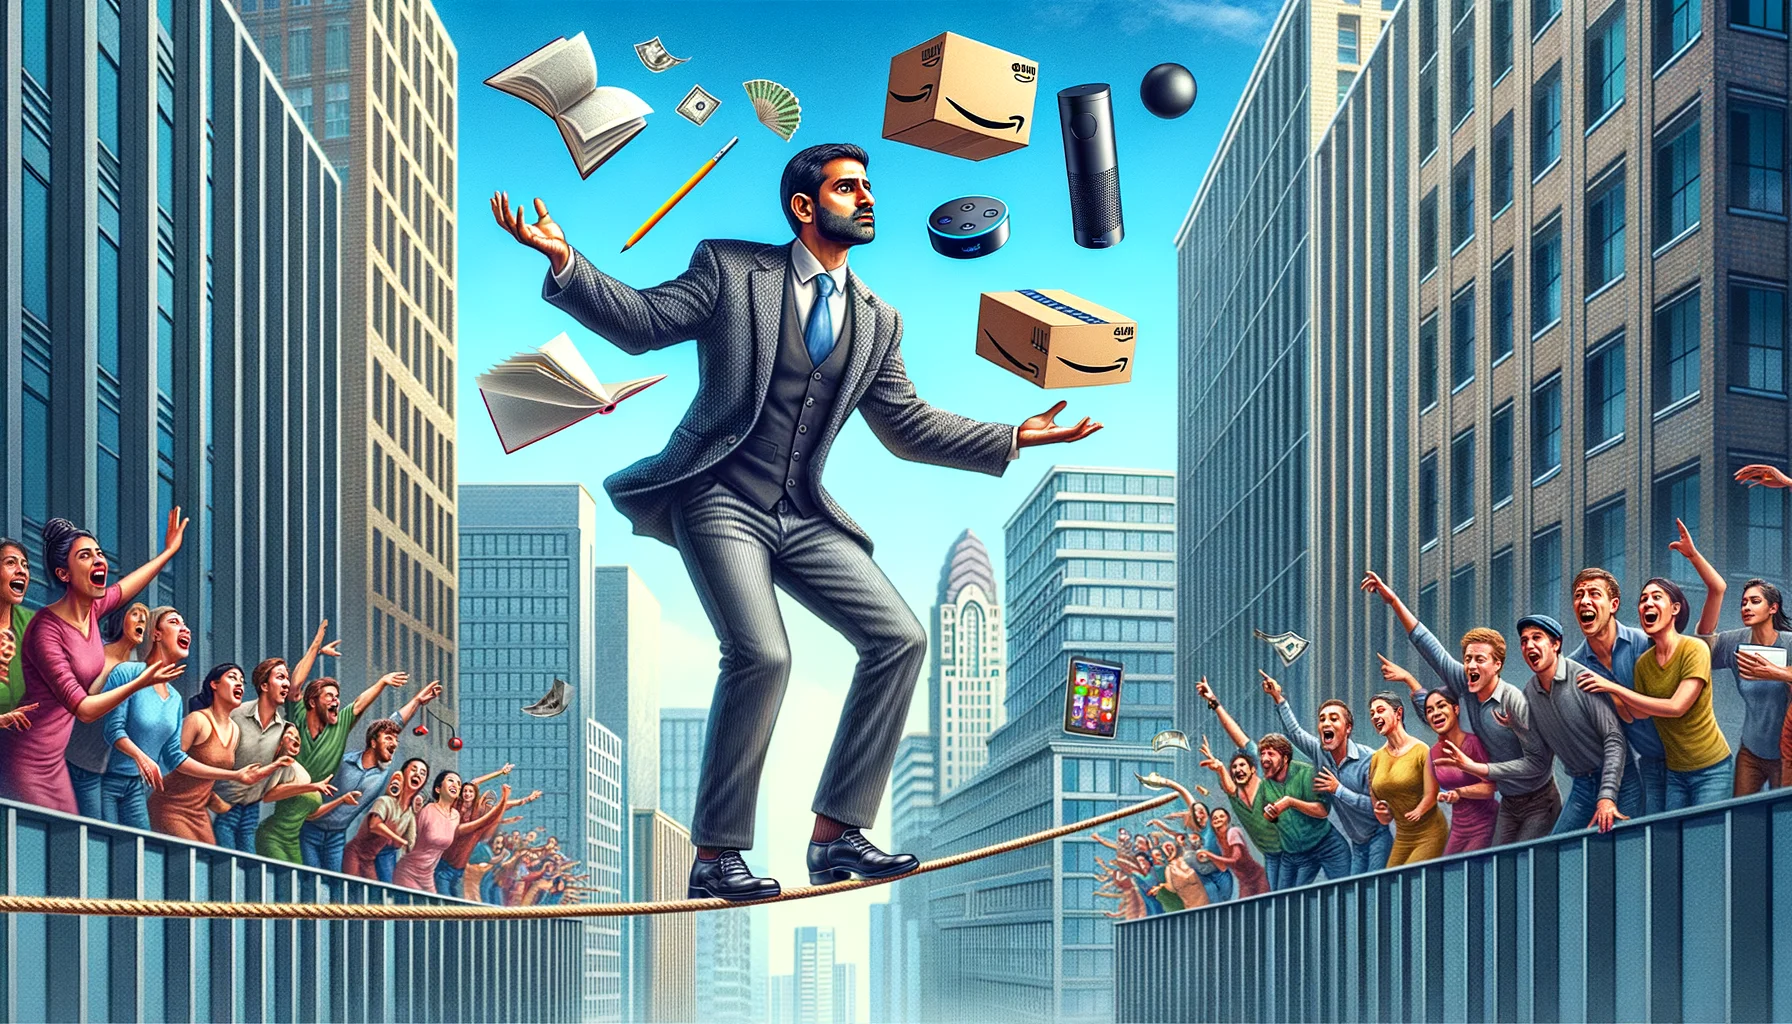 Craft a humorous and realistic image that portrays the concept of affiliate marketing related to Amazon. In the foreground, portray a South Asian man wearing a business suit, juggling multiple items symbolic of Amazon products: a book, a package, and an echo dot. He is balancing on a tightrope that stretches between two tall buildings, representing the balance involved in affiliate marketing. At one side of the buildings, portray a crowd of diverse people, all laughing and pointing while taking pictures of the spectacle.